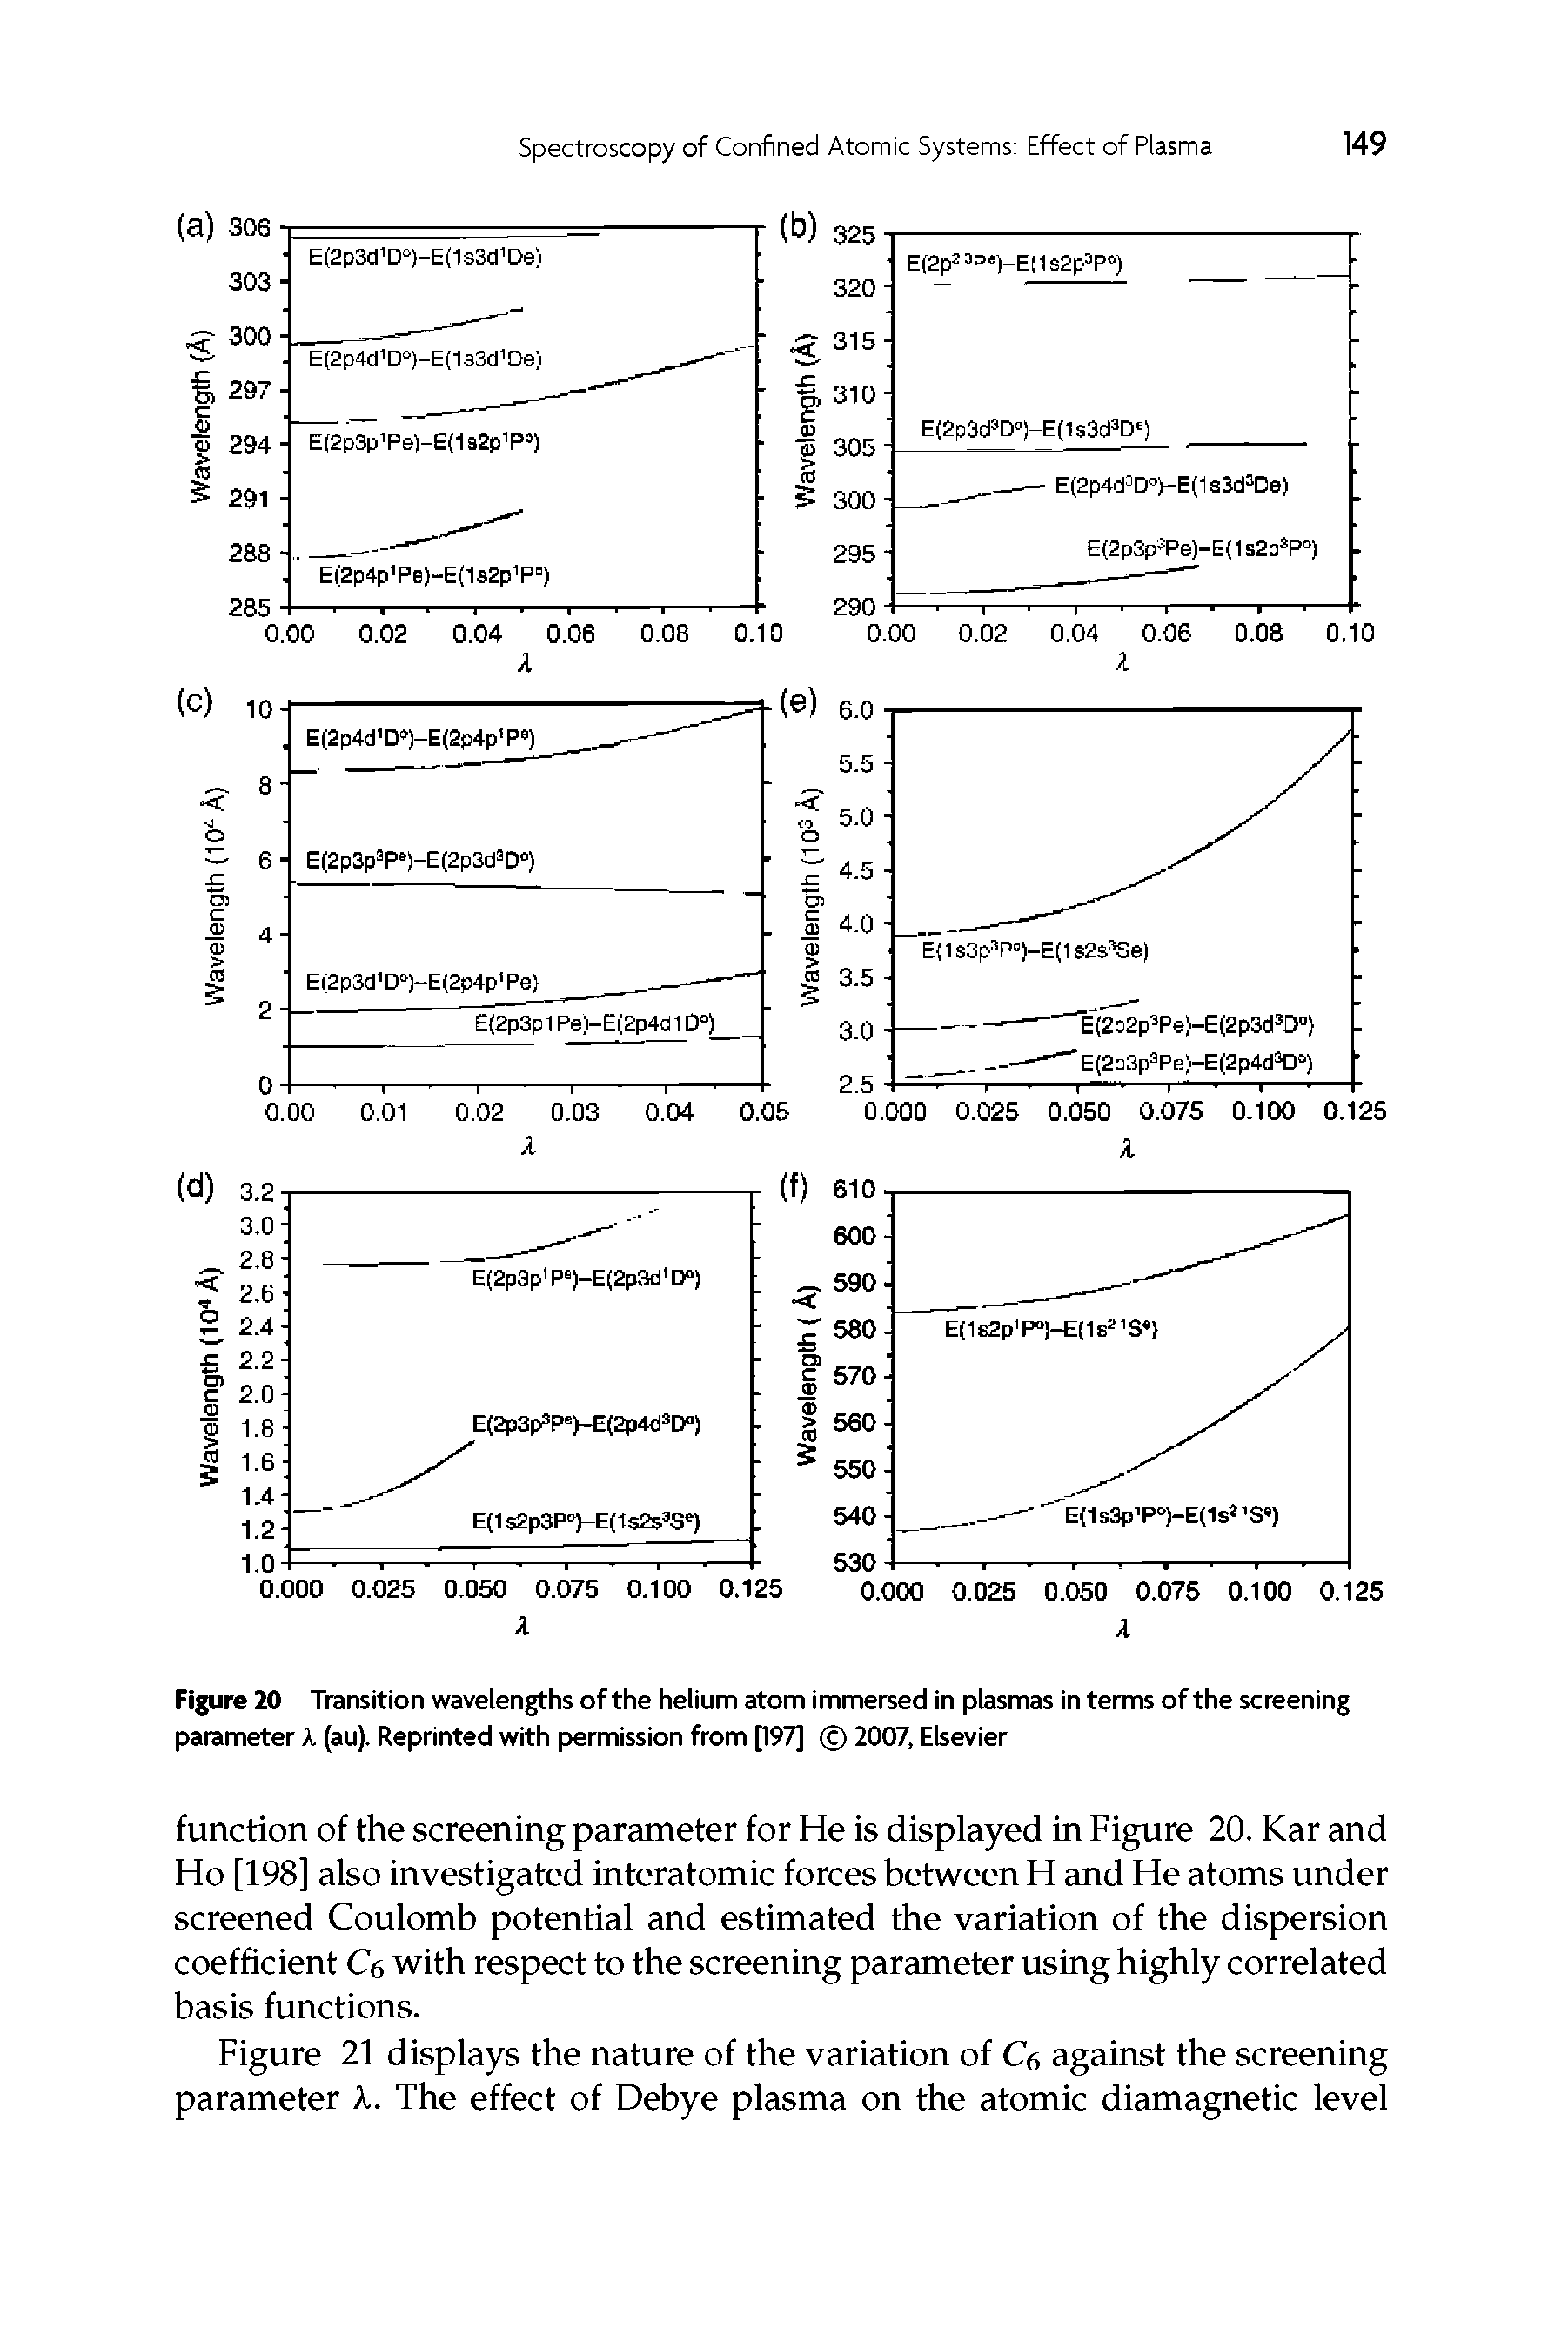 Figure 20 Transition wavelengths of the helium atom immersed in plasmas in terms of the screening parameter k (au). Reprinted with permission from [197] 2007, Elsevier...